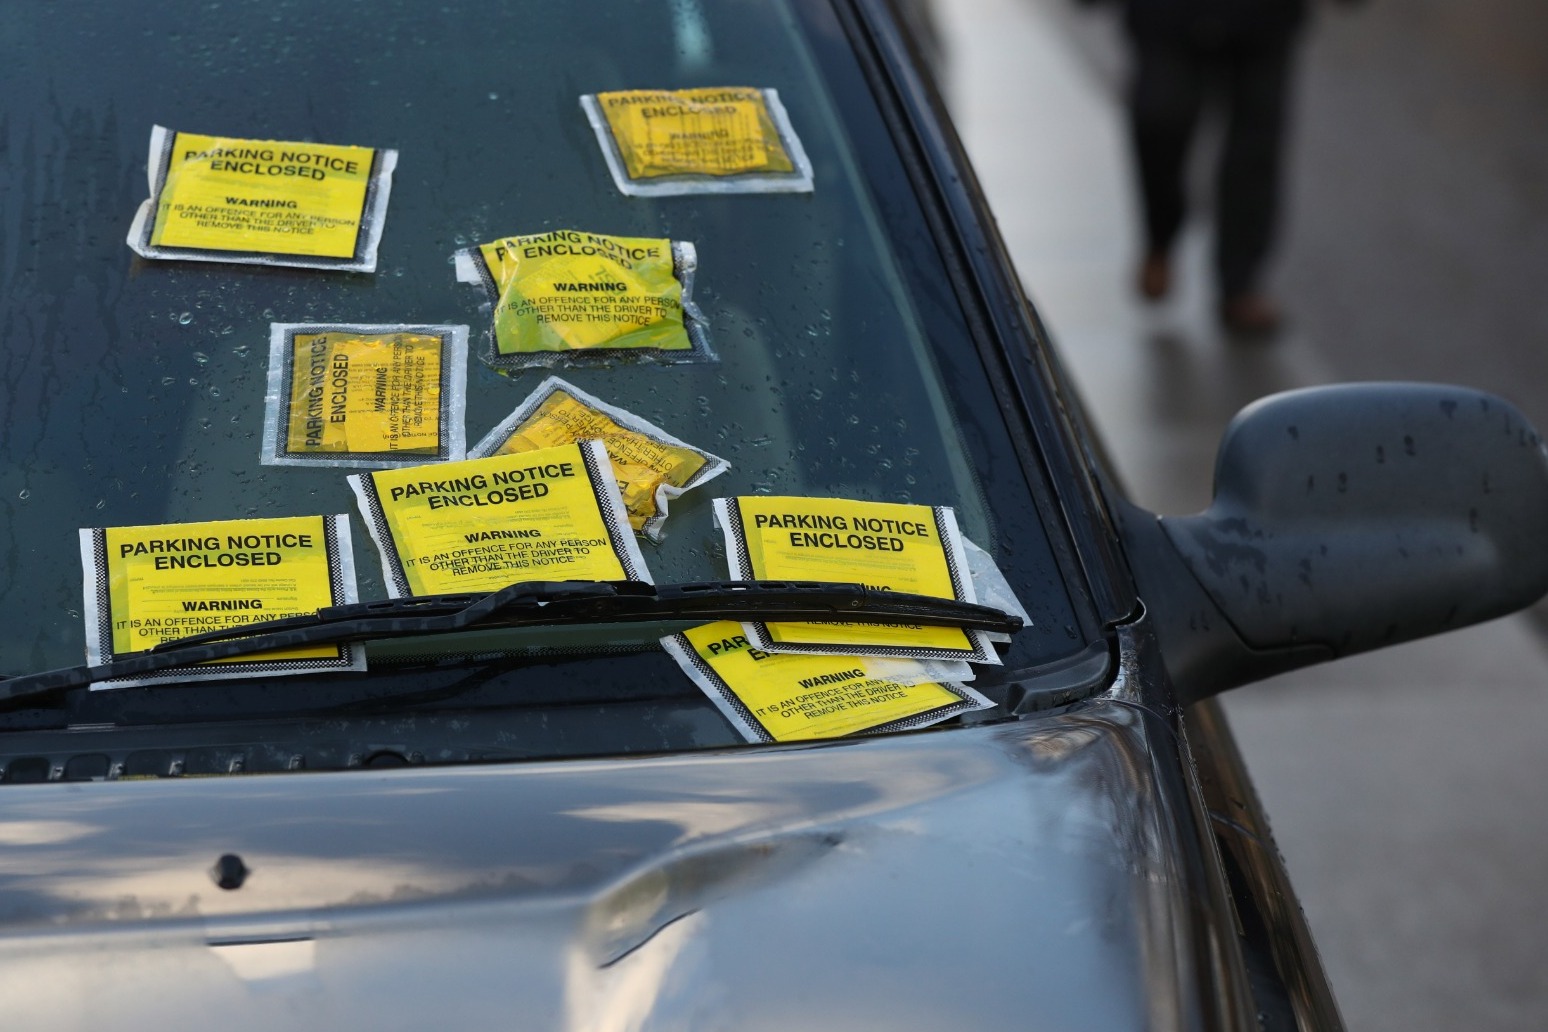 Councils issuing nearly 20,000 parking fines each day 